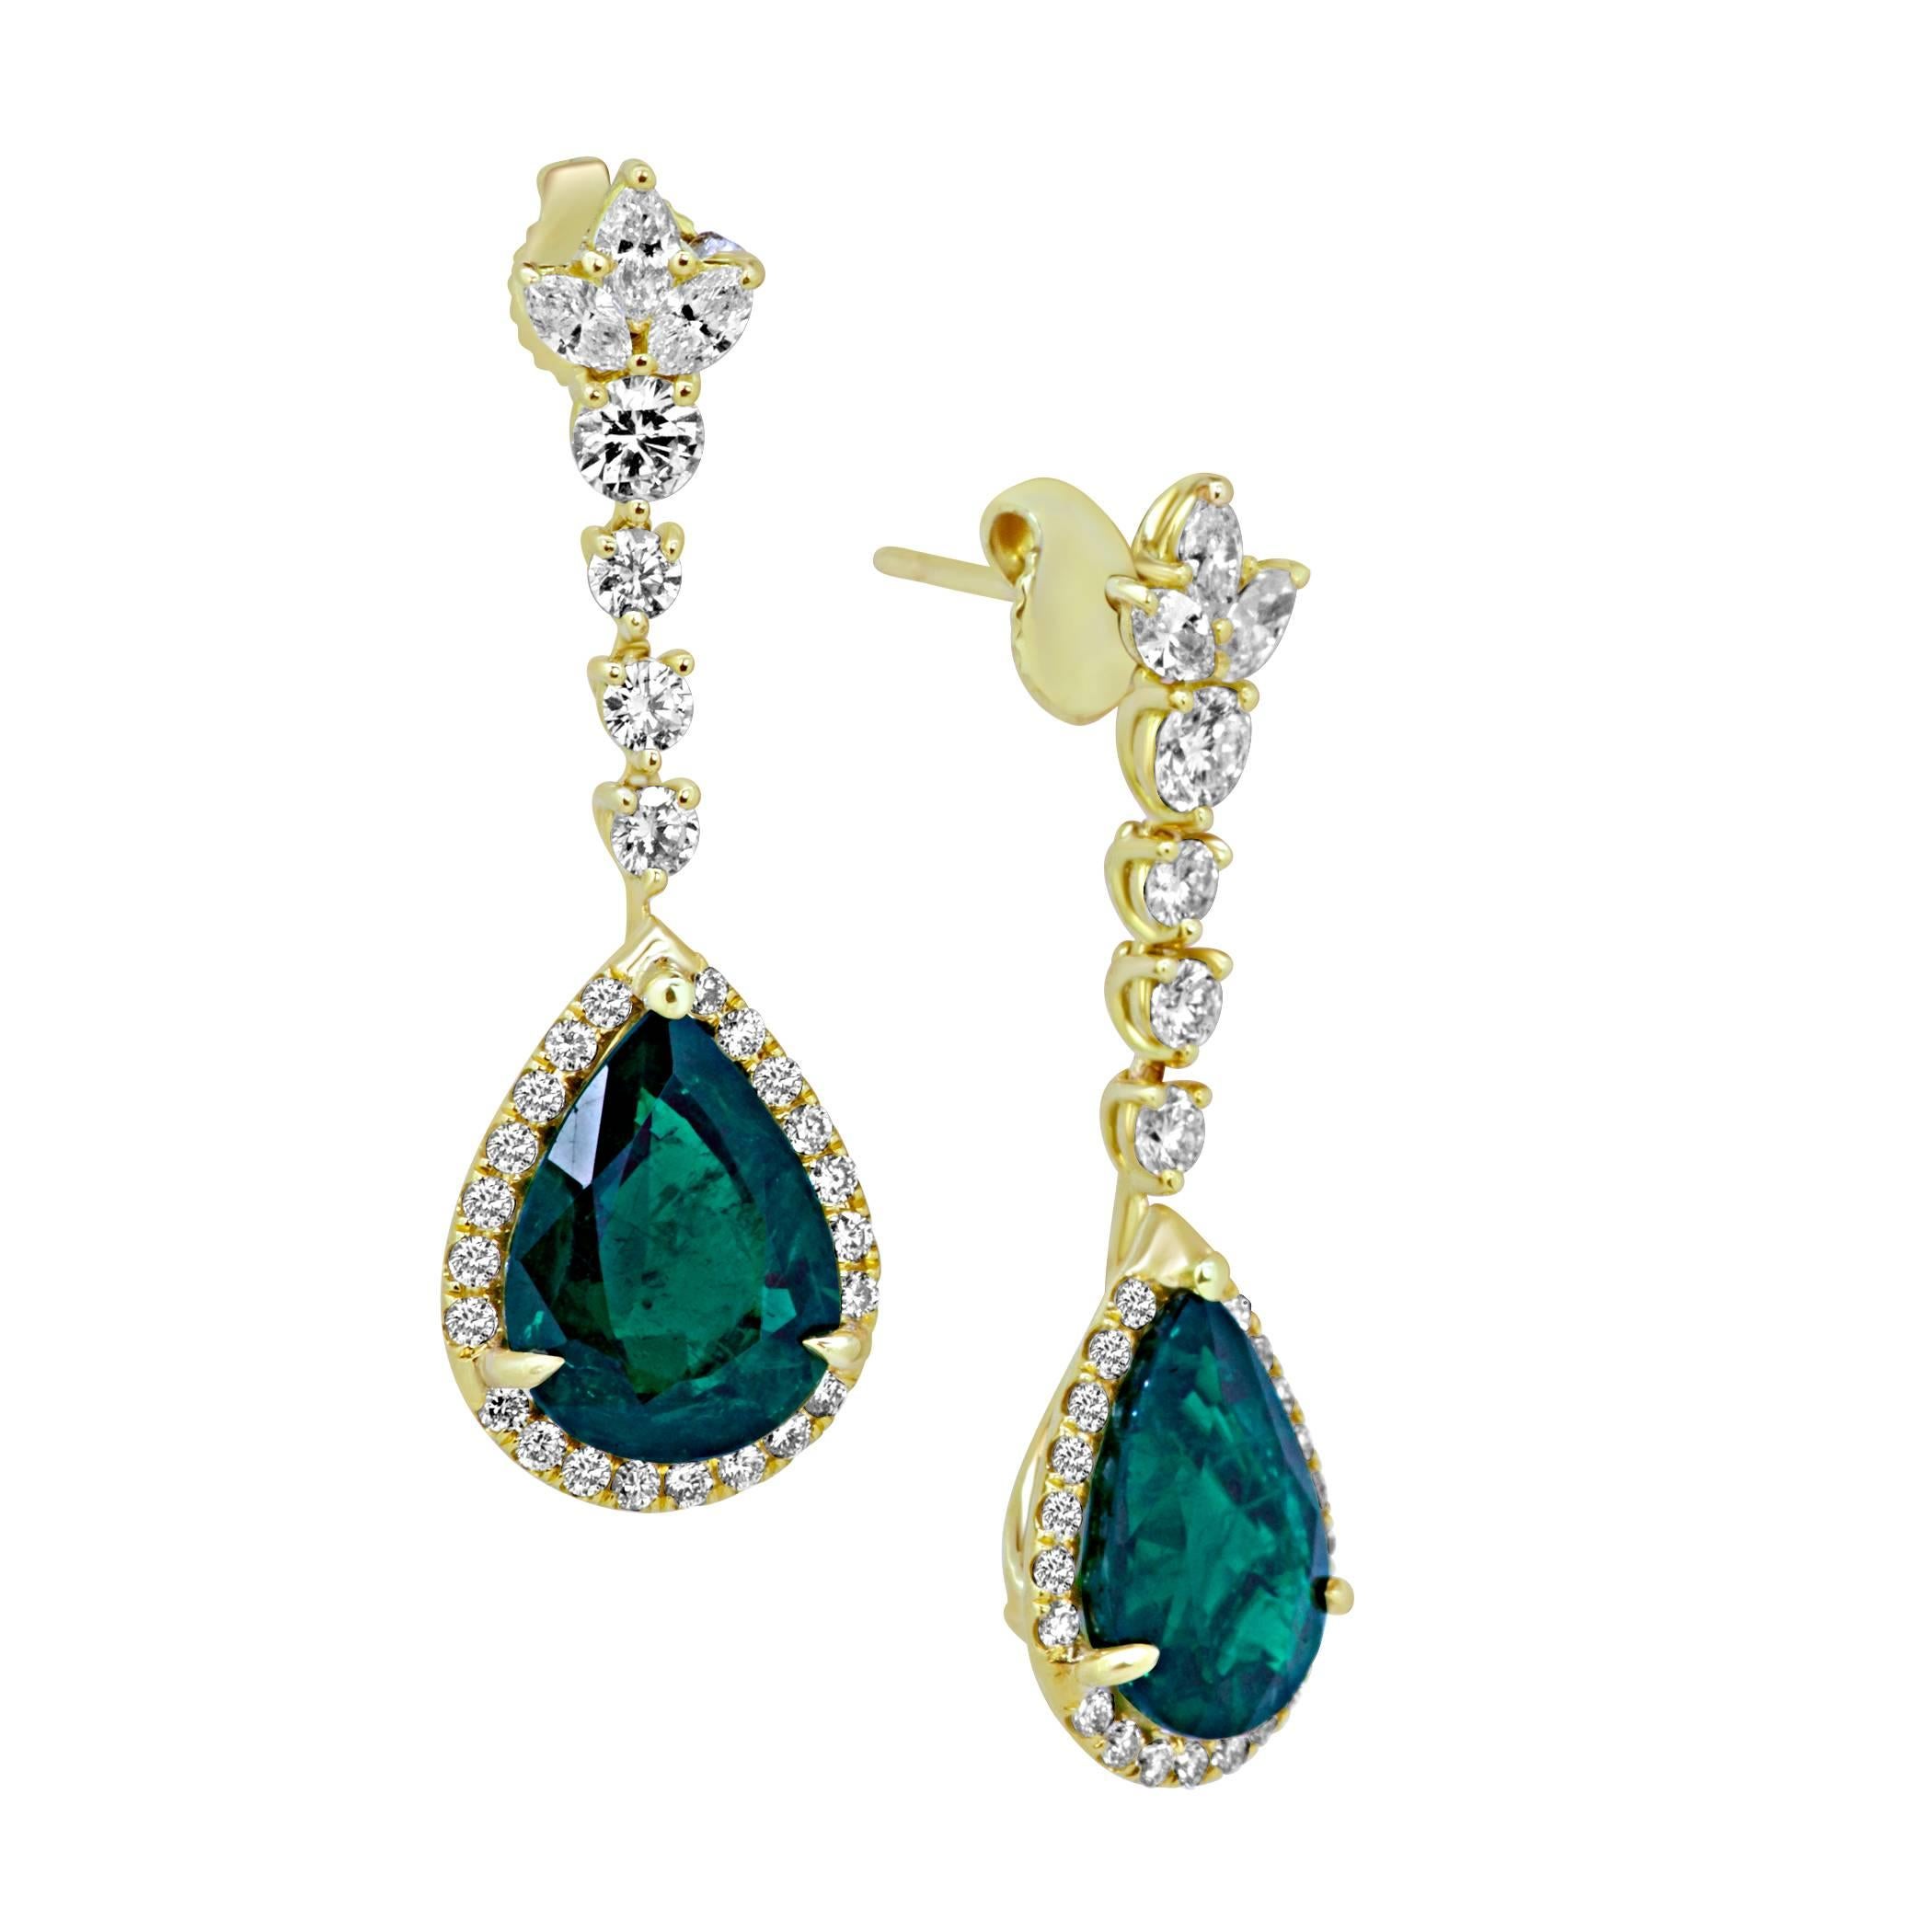 Very Rich Color Natural Emerald Pearshapes 7.06 Carat encircled in White Diamond Round Halo 1.12 Carat With 3 White Diamond Marquis on top 0.47 Carat in 18K Yellow Gold exquisite one of a kind Handmade  Earring.

MADE IN USA
Total Stones Weight 8.65